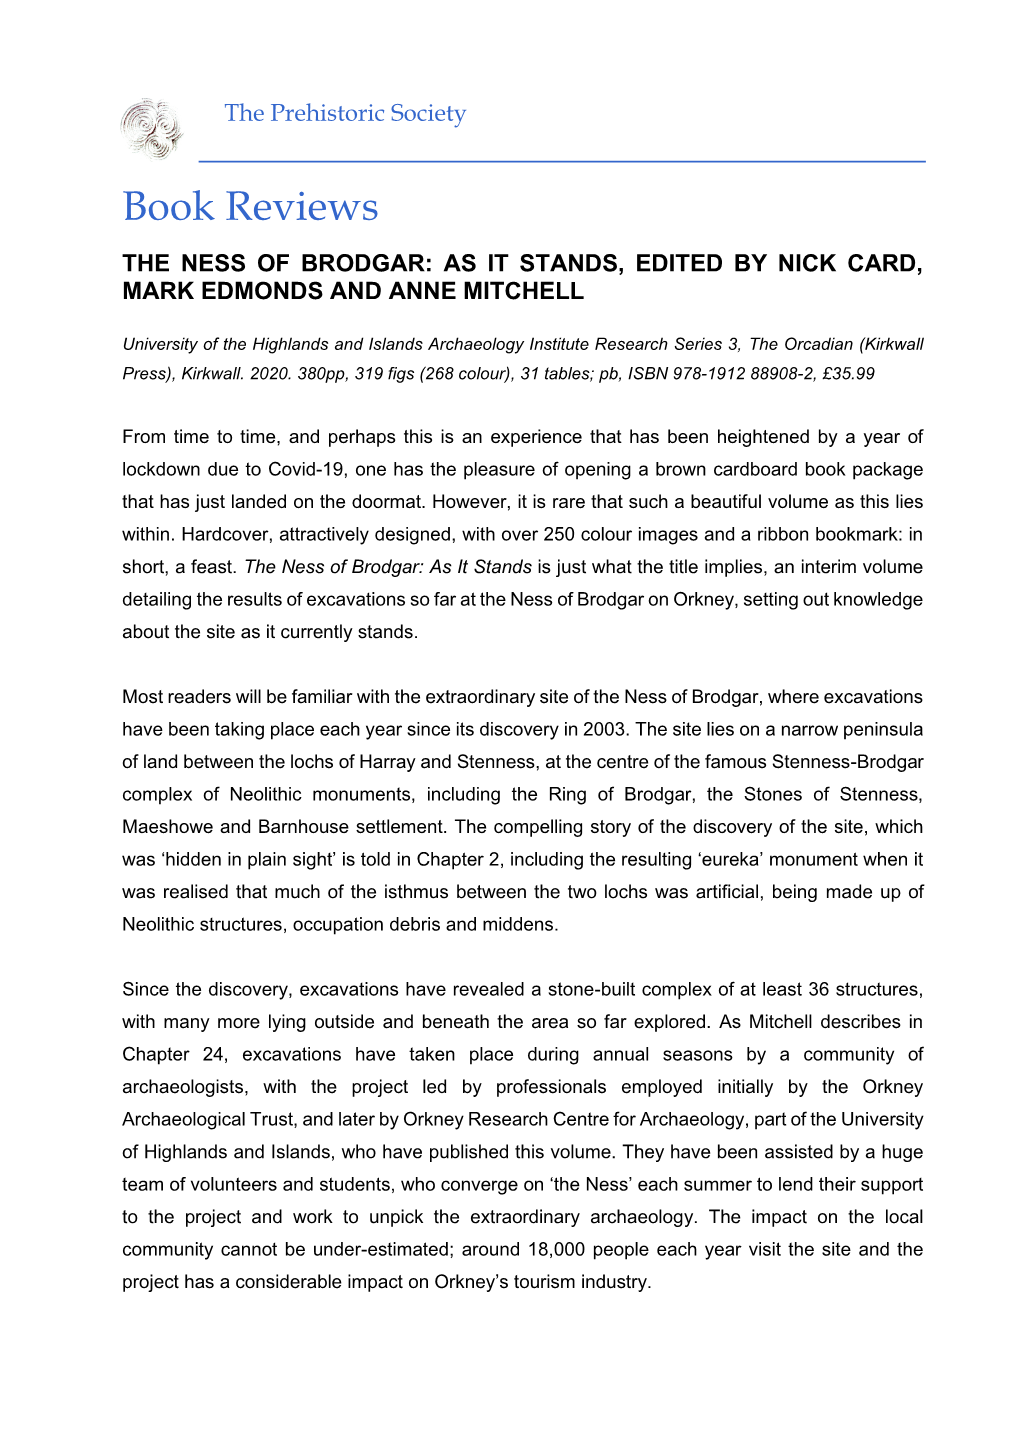 The Ness of Brodgar: As It Stands, Edited by Nick Card, Mark Edmonds and Anne Mitchell